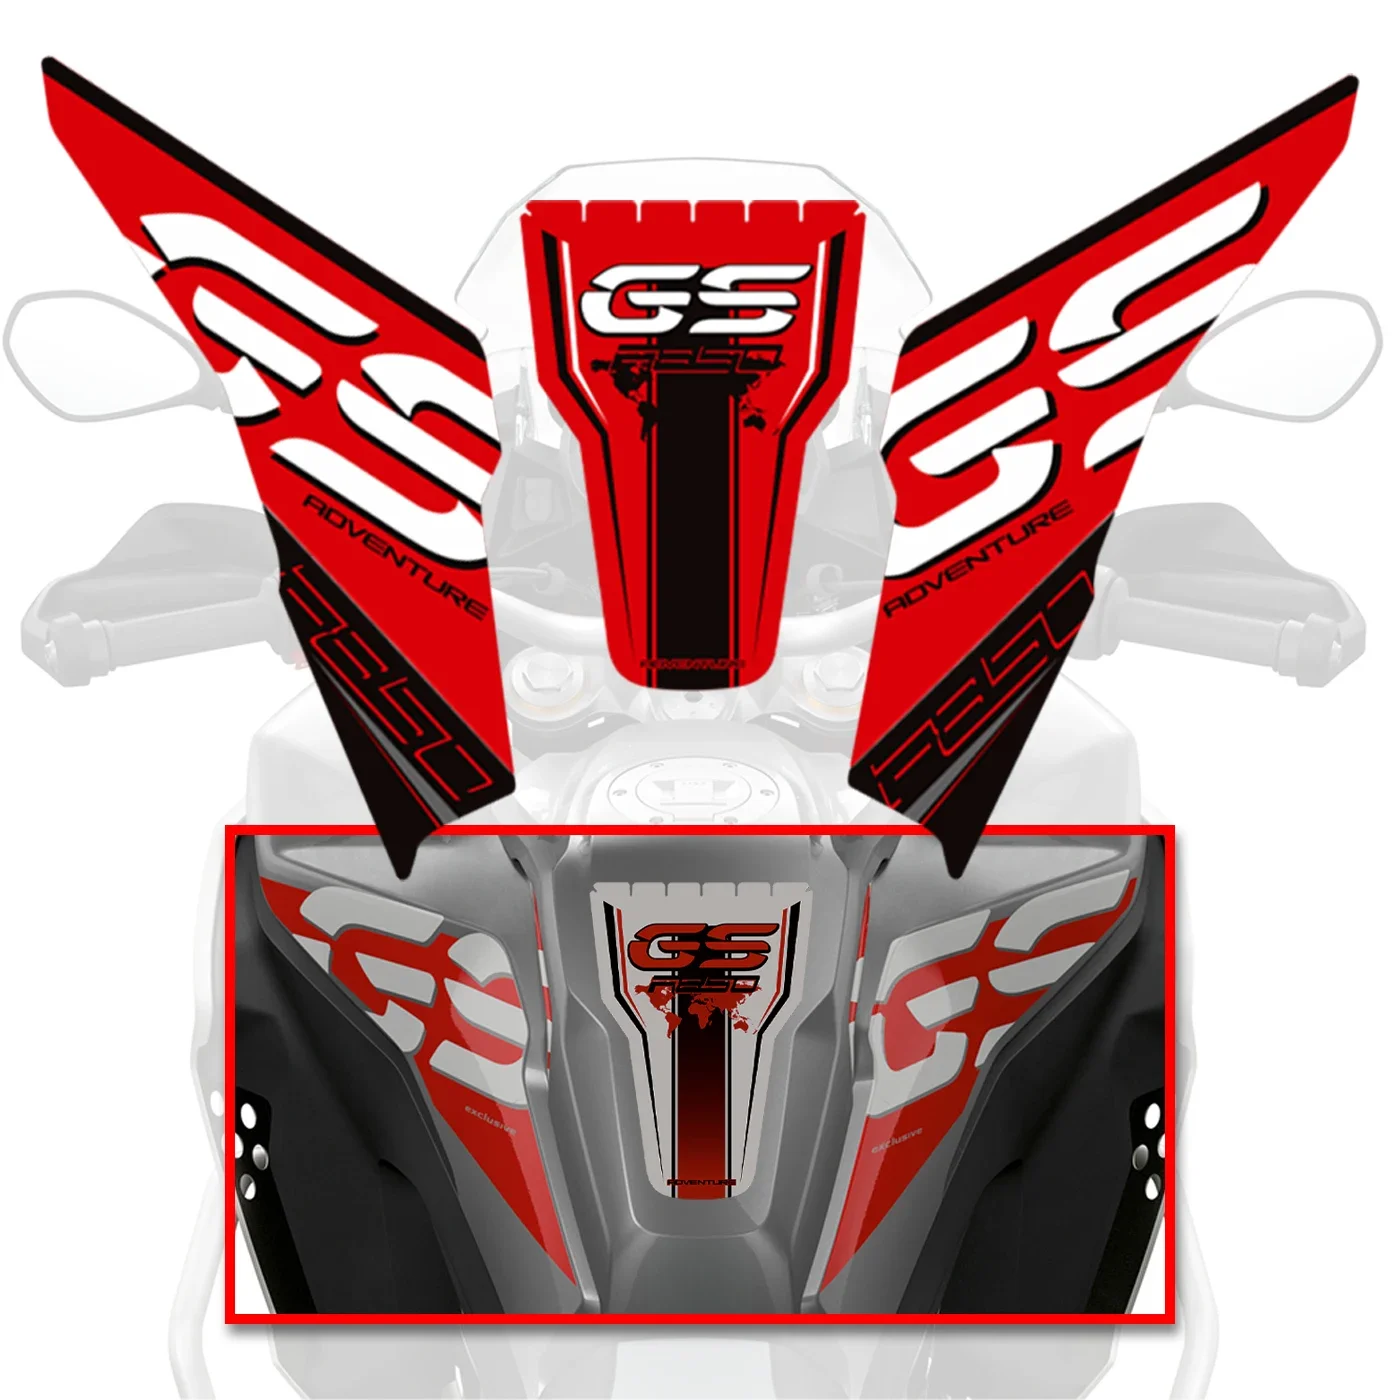 GS F850 F850 GS850 GSA Fit BMW Protection decals Stickers Tank Pad Fairing Fender Gas Knee Adventure Tankpad 2019 2020 2021 2022